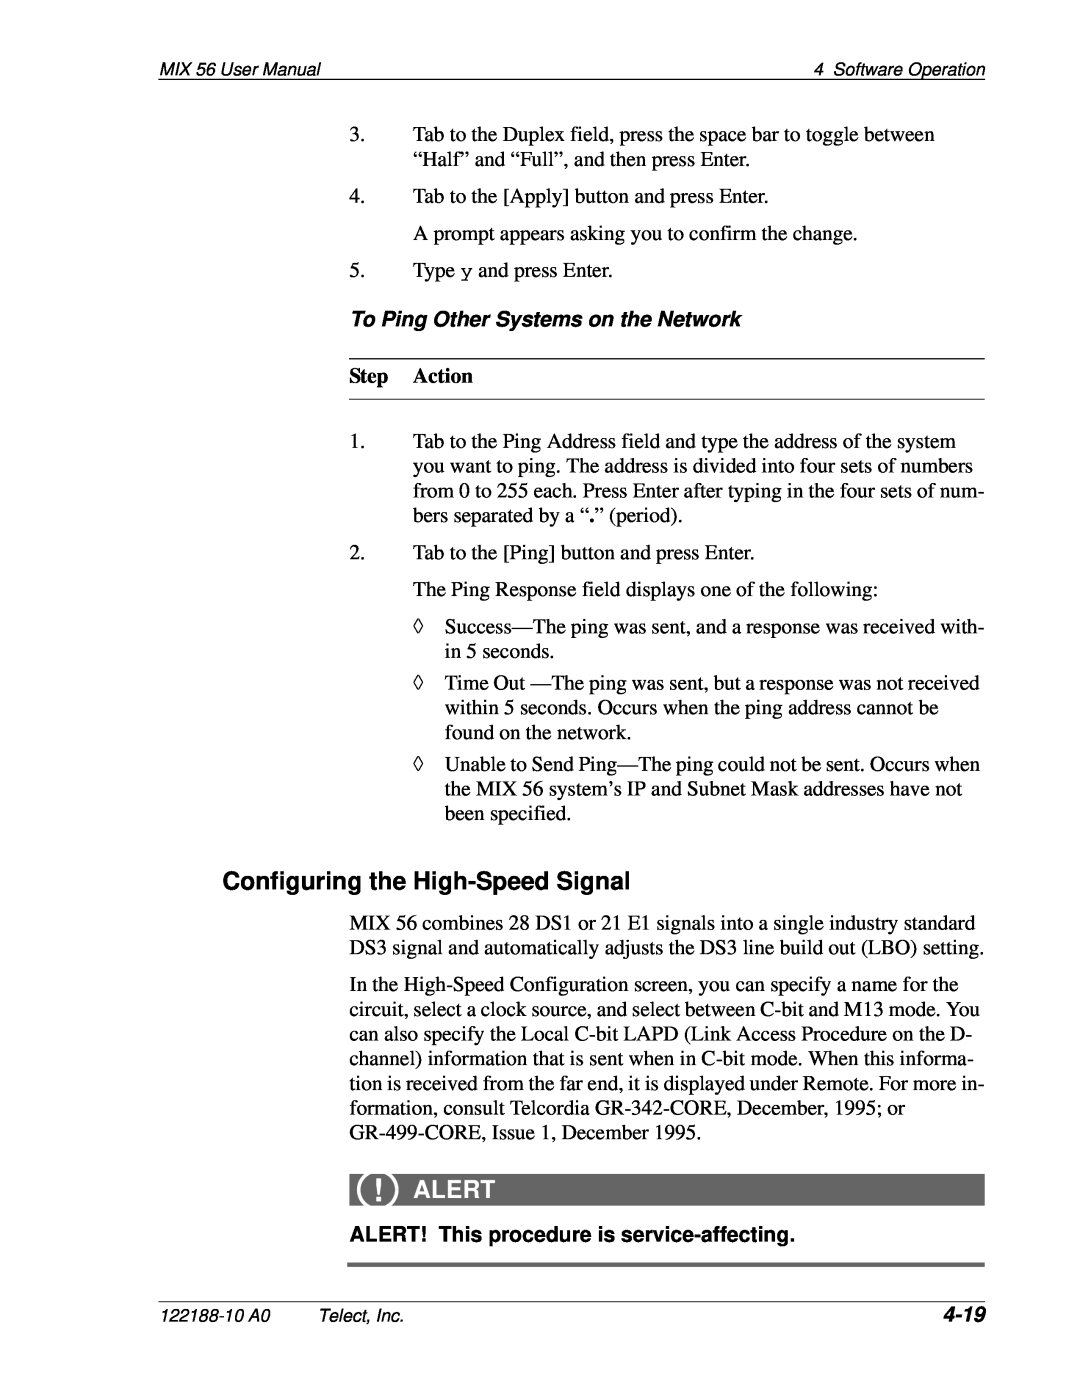 Telect MIX 56 user manual Configuring the High-Speed Signal, To Ping Other Systems on the Network, 4-19, Alert, Step Action 